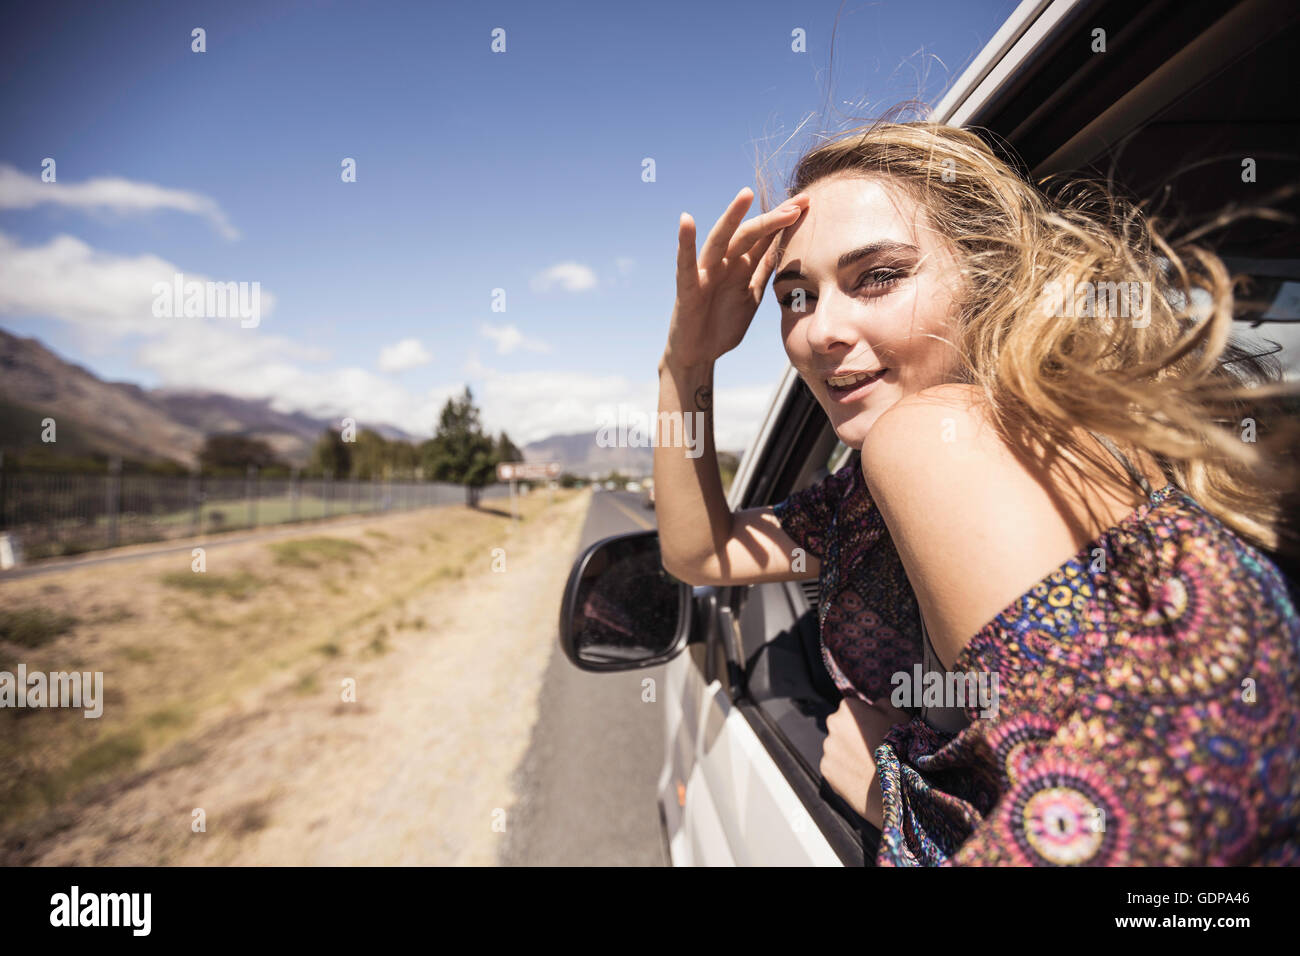 Woman looking out of car window shielding eyes Stock Photo